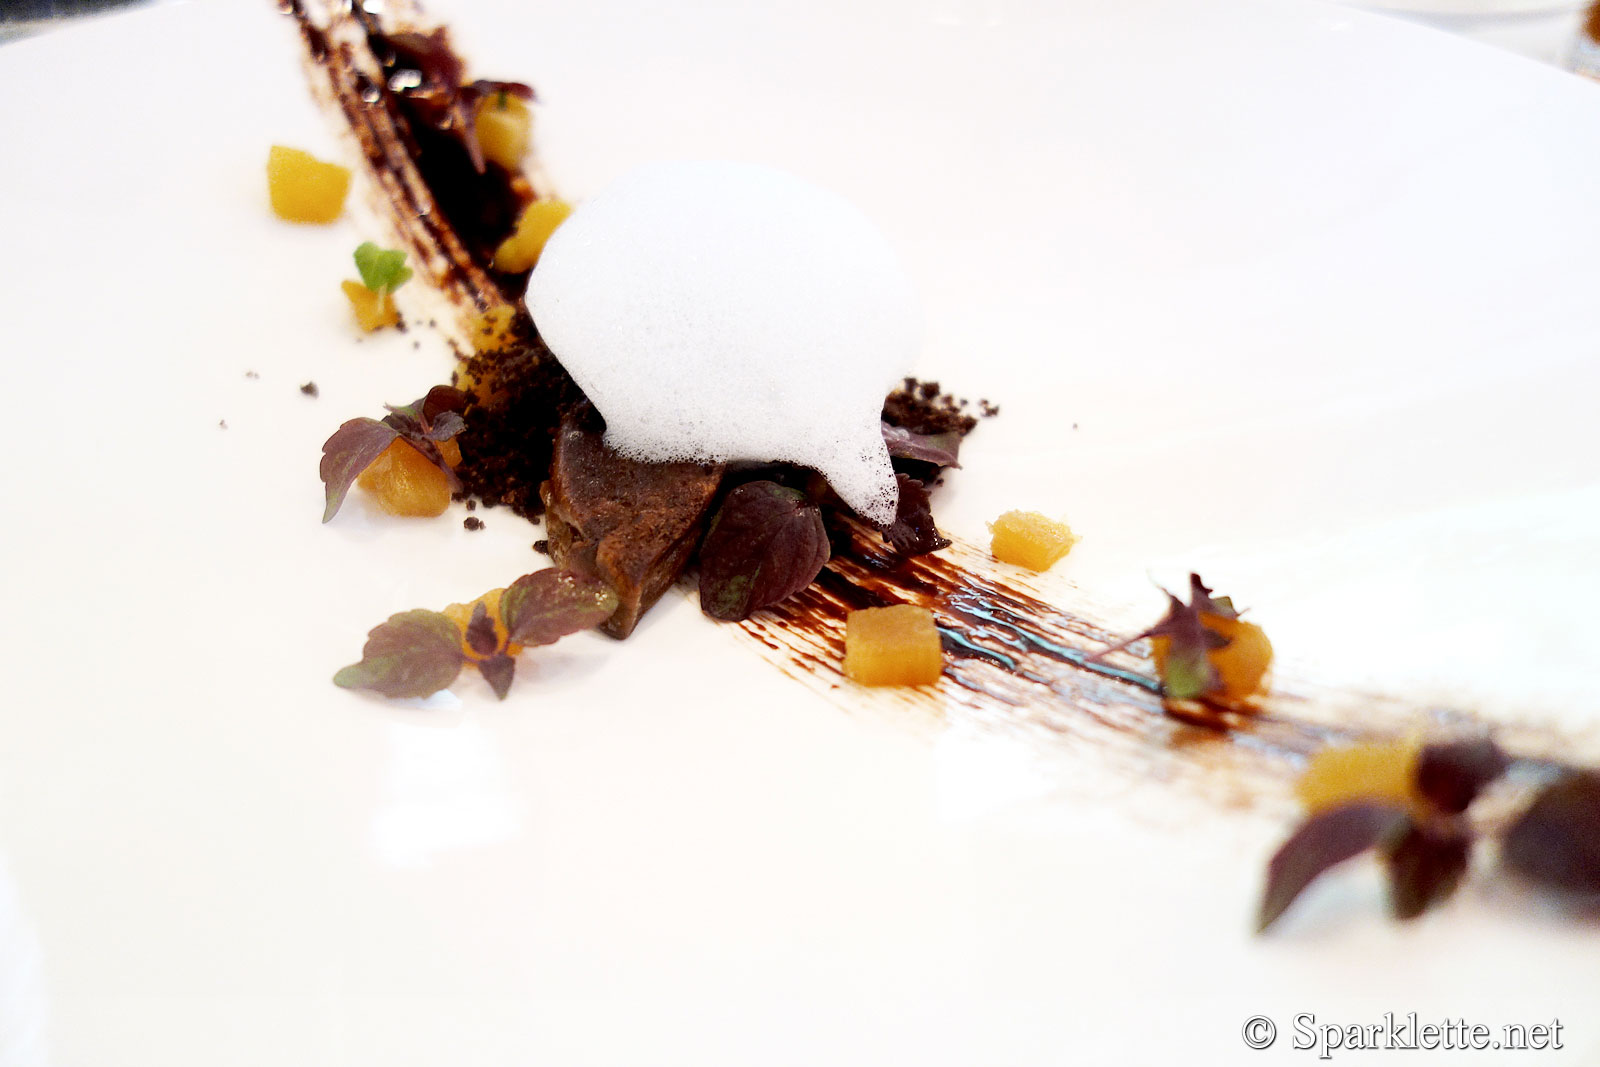 Pan-seared foie gras with chocolate and pineapple foam